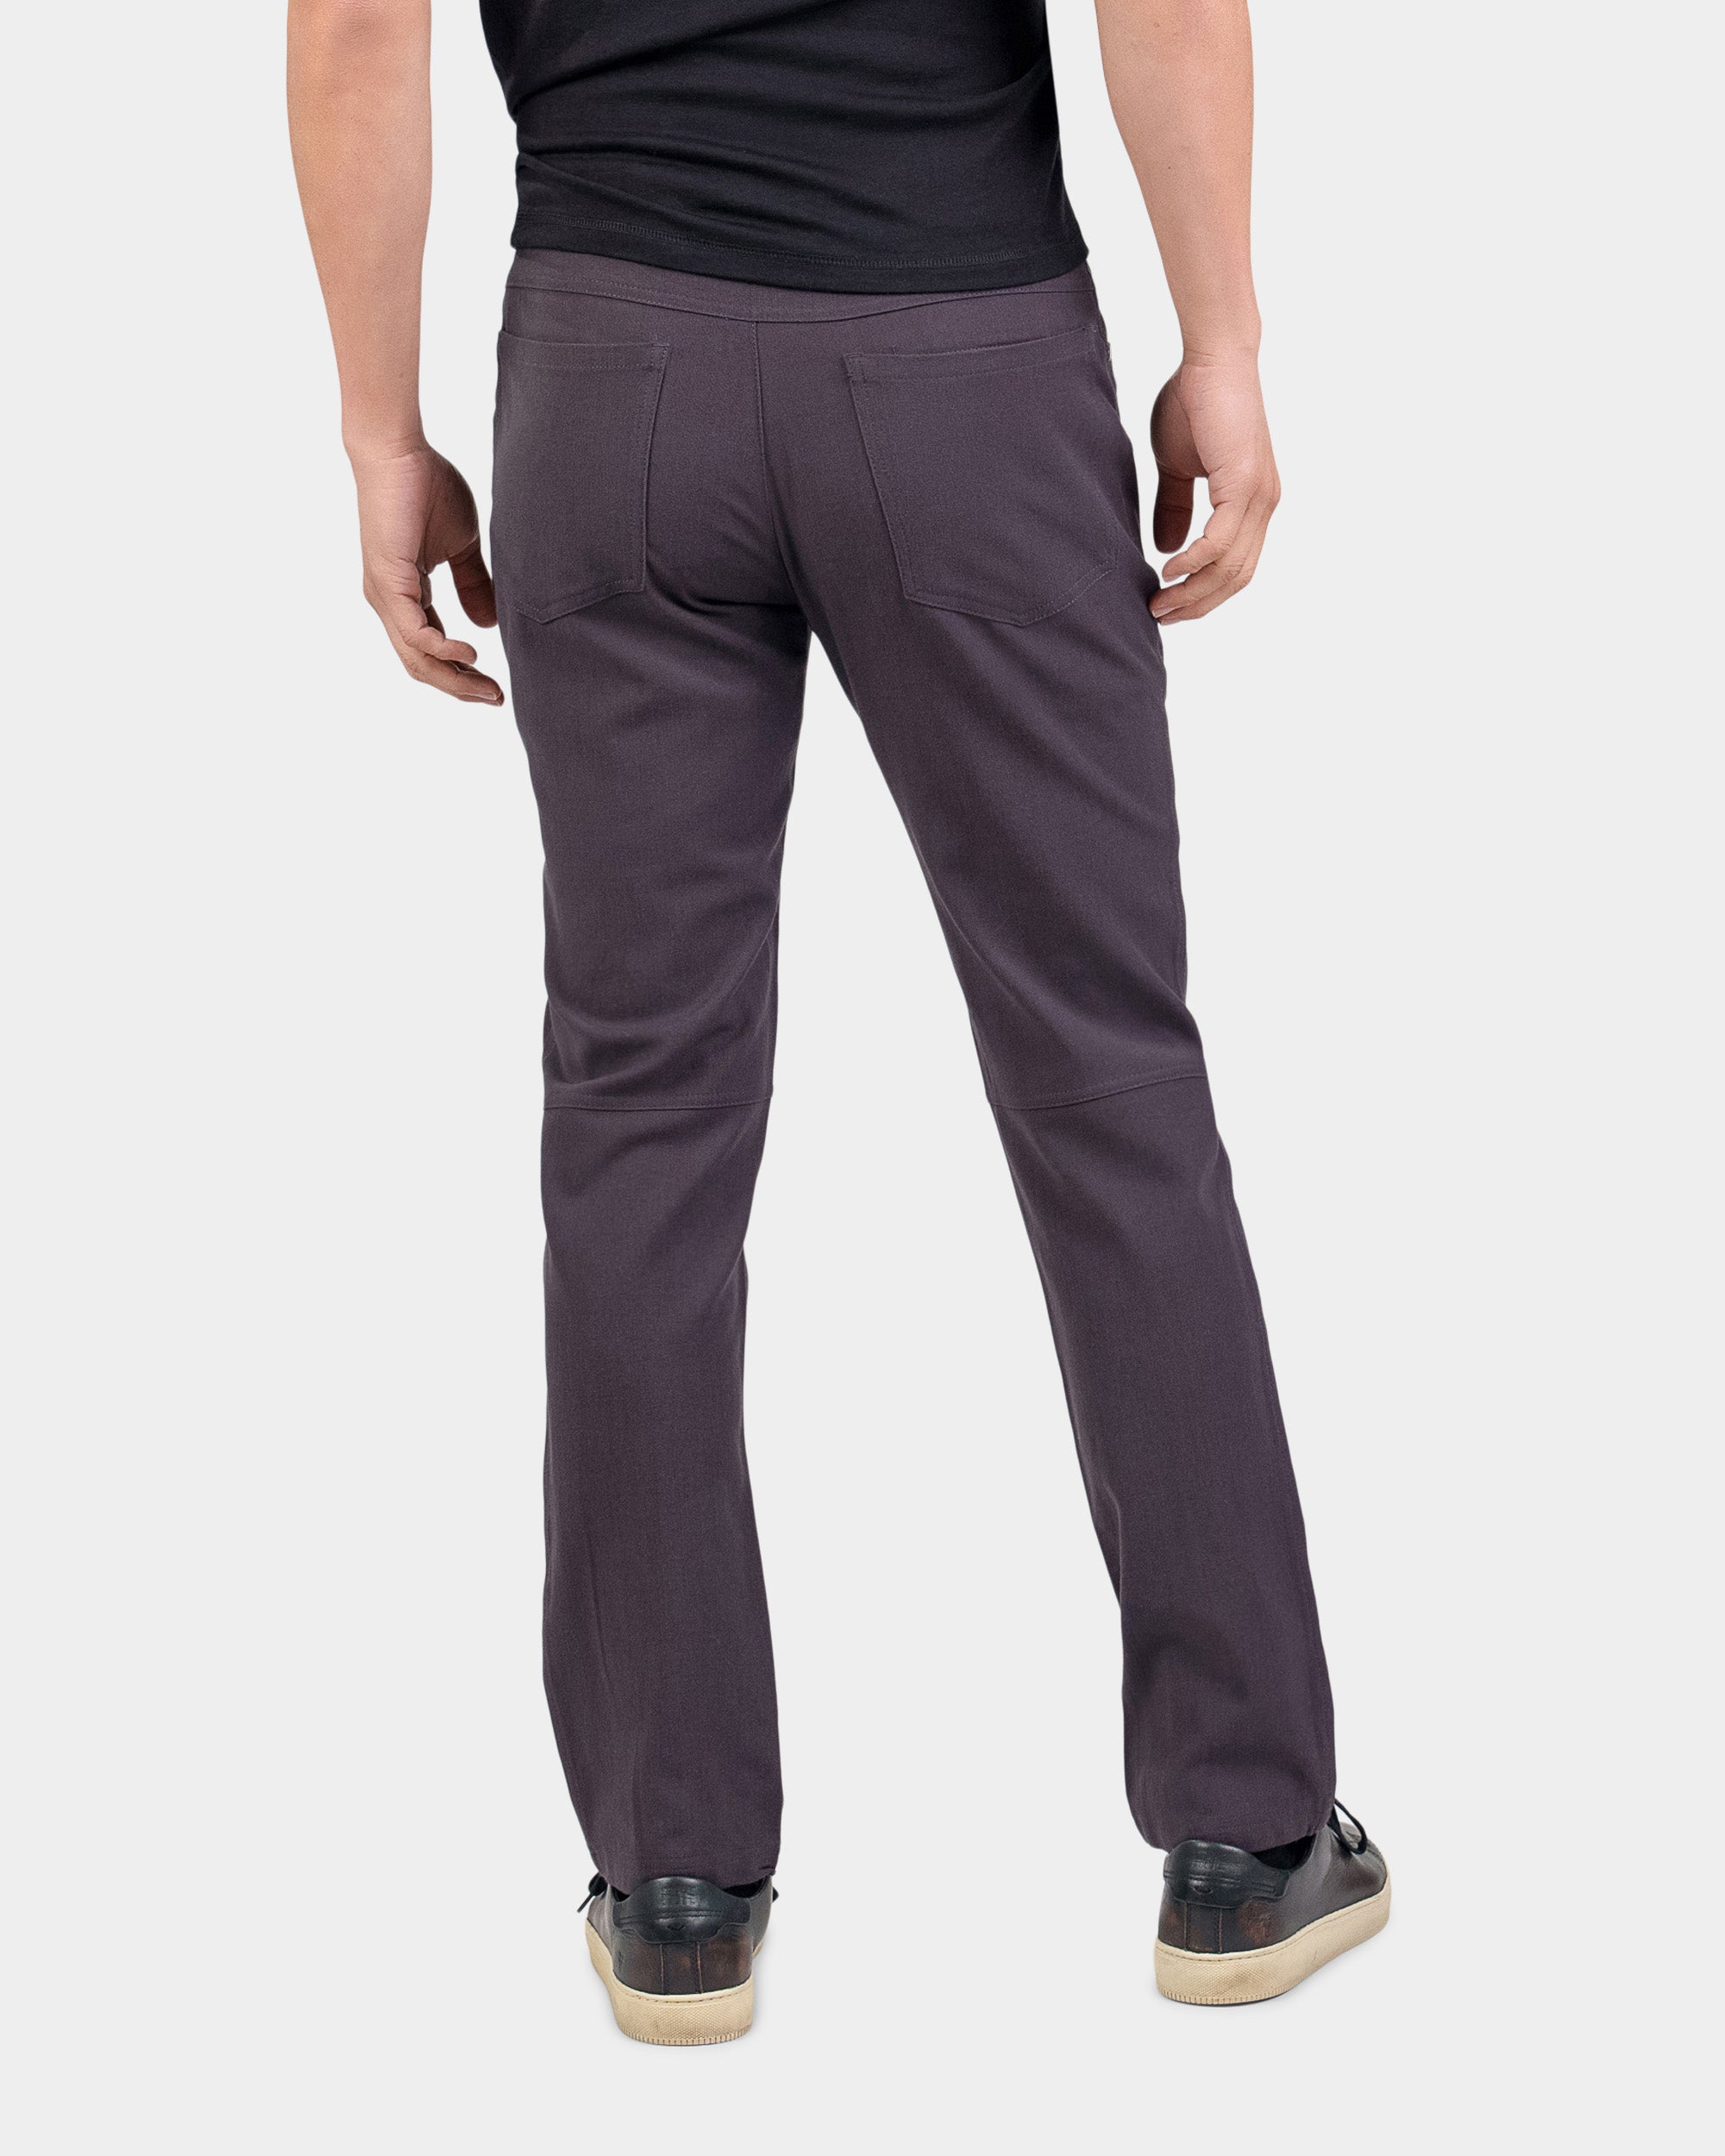 Studio Pant III (Regular) Lined 32 - These lightweight pants are